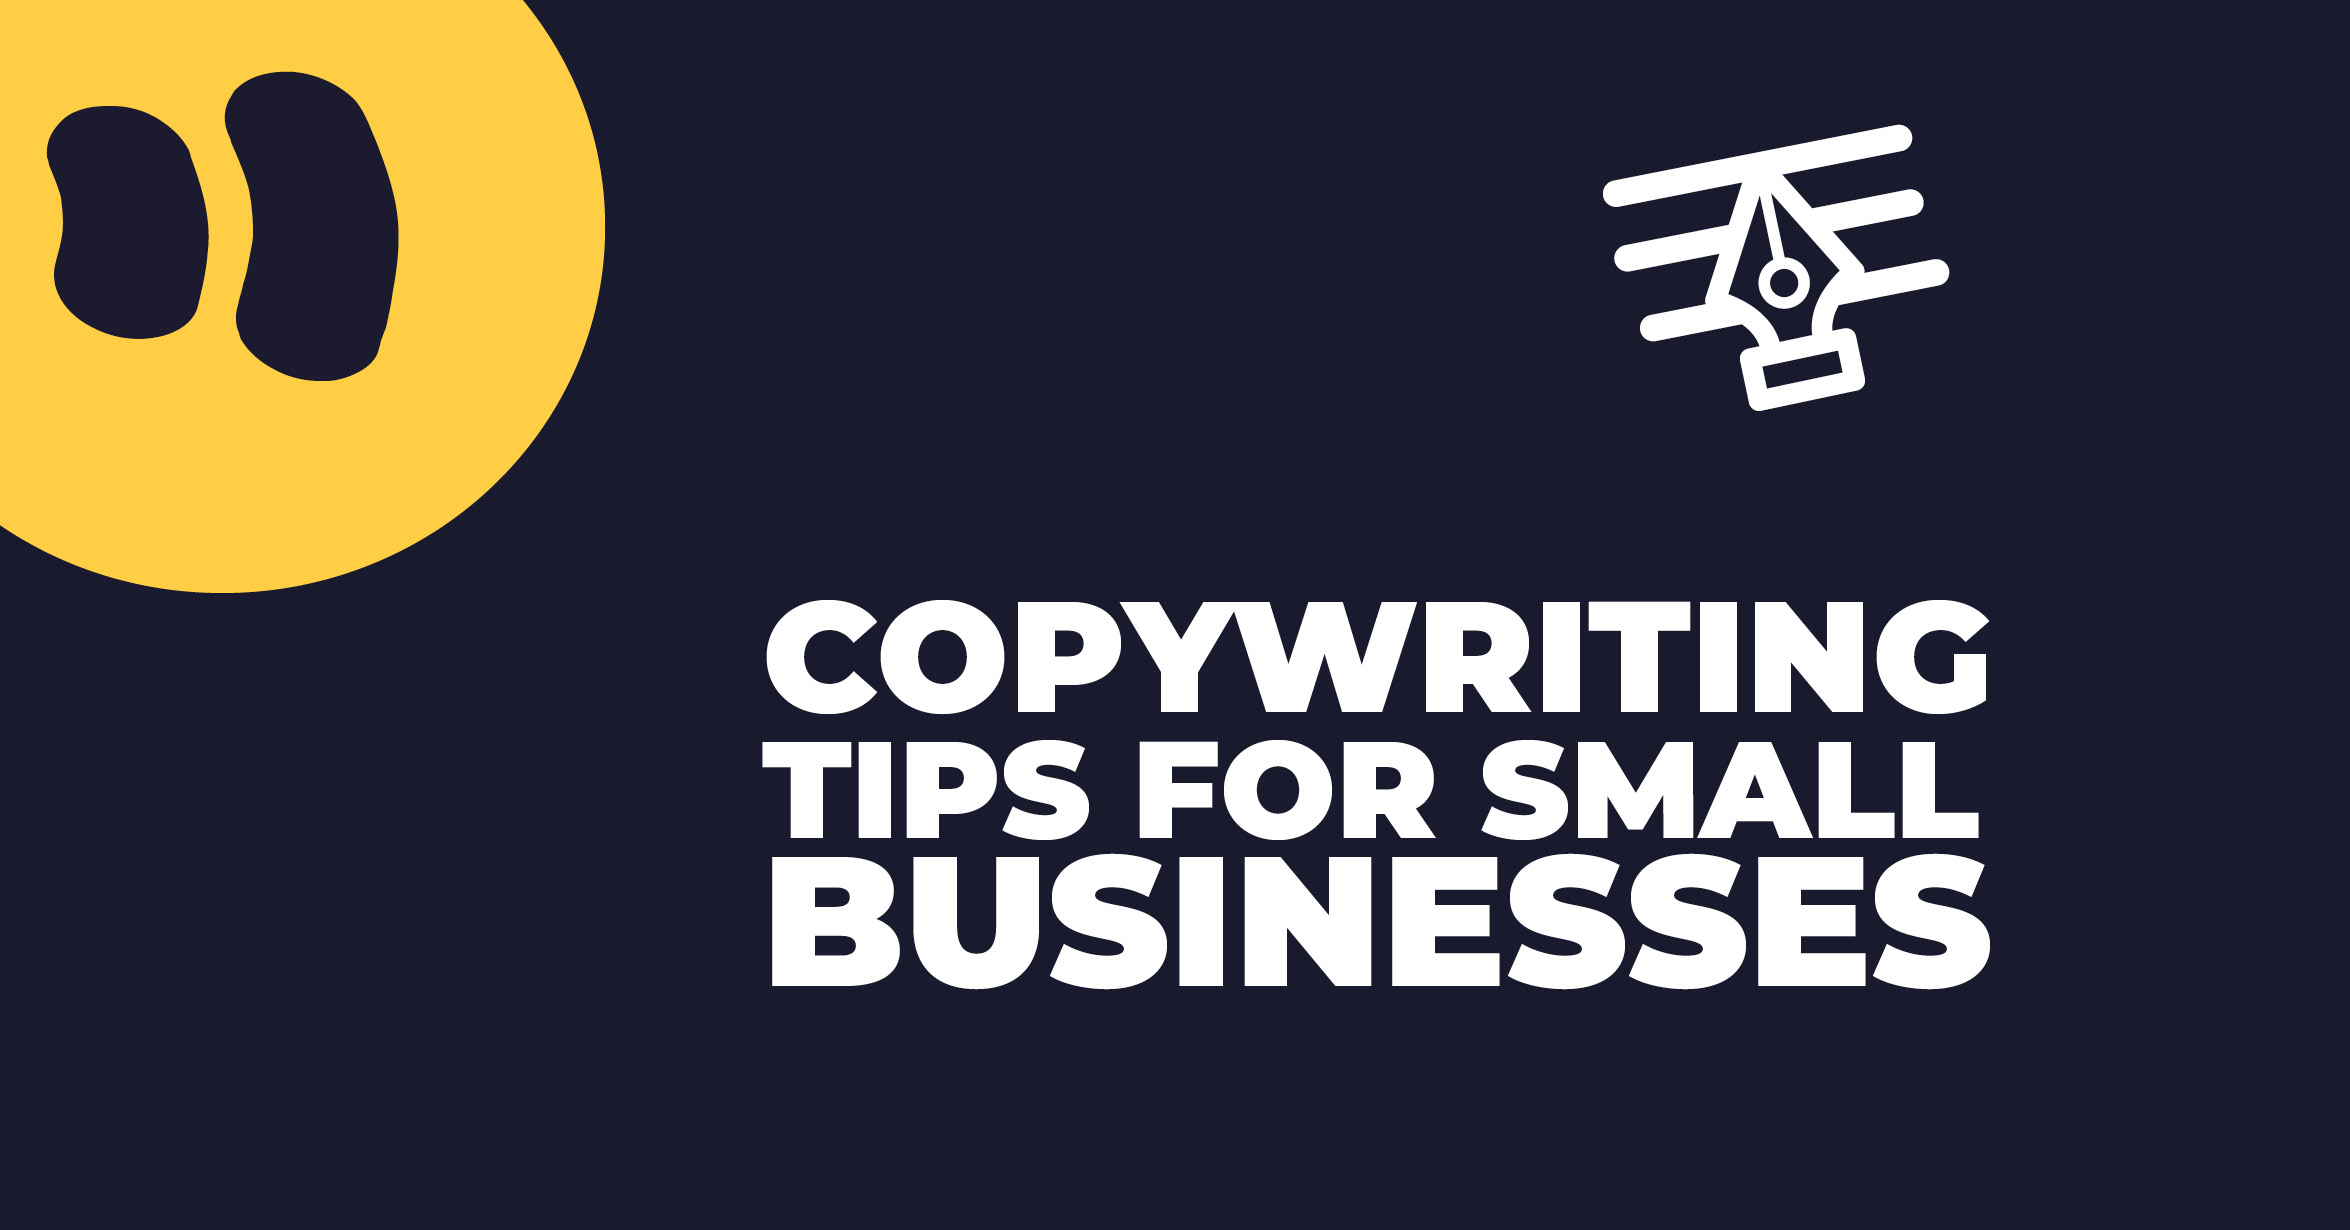 Copywriting for Small Businesses: Tips From the Experts